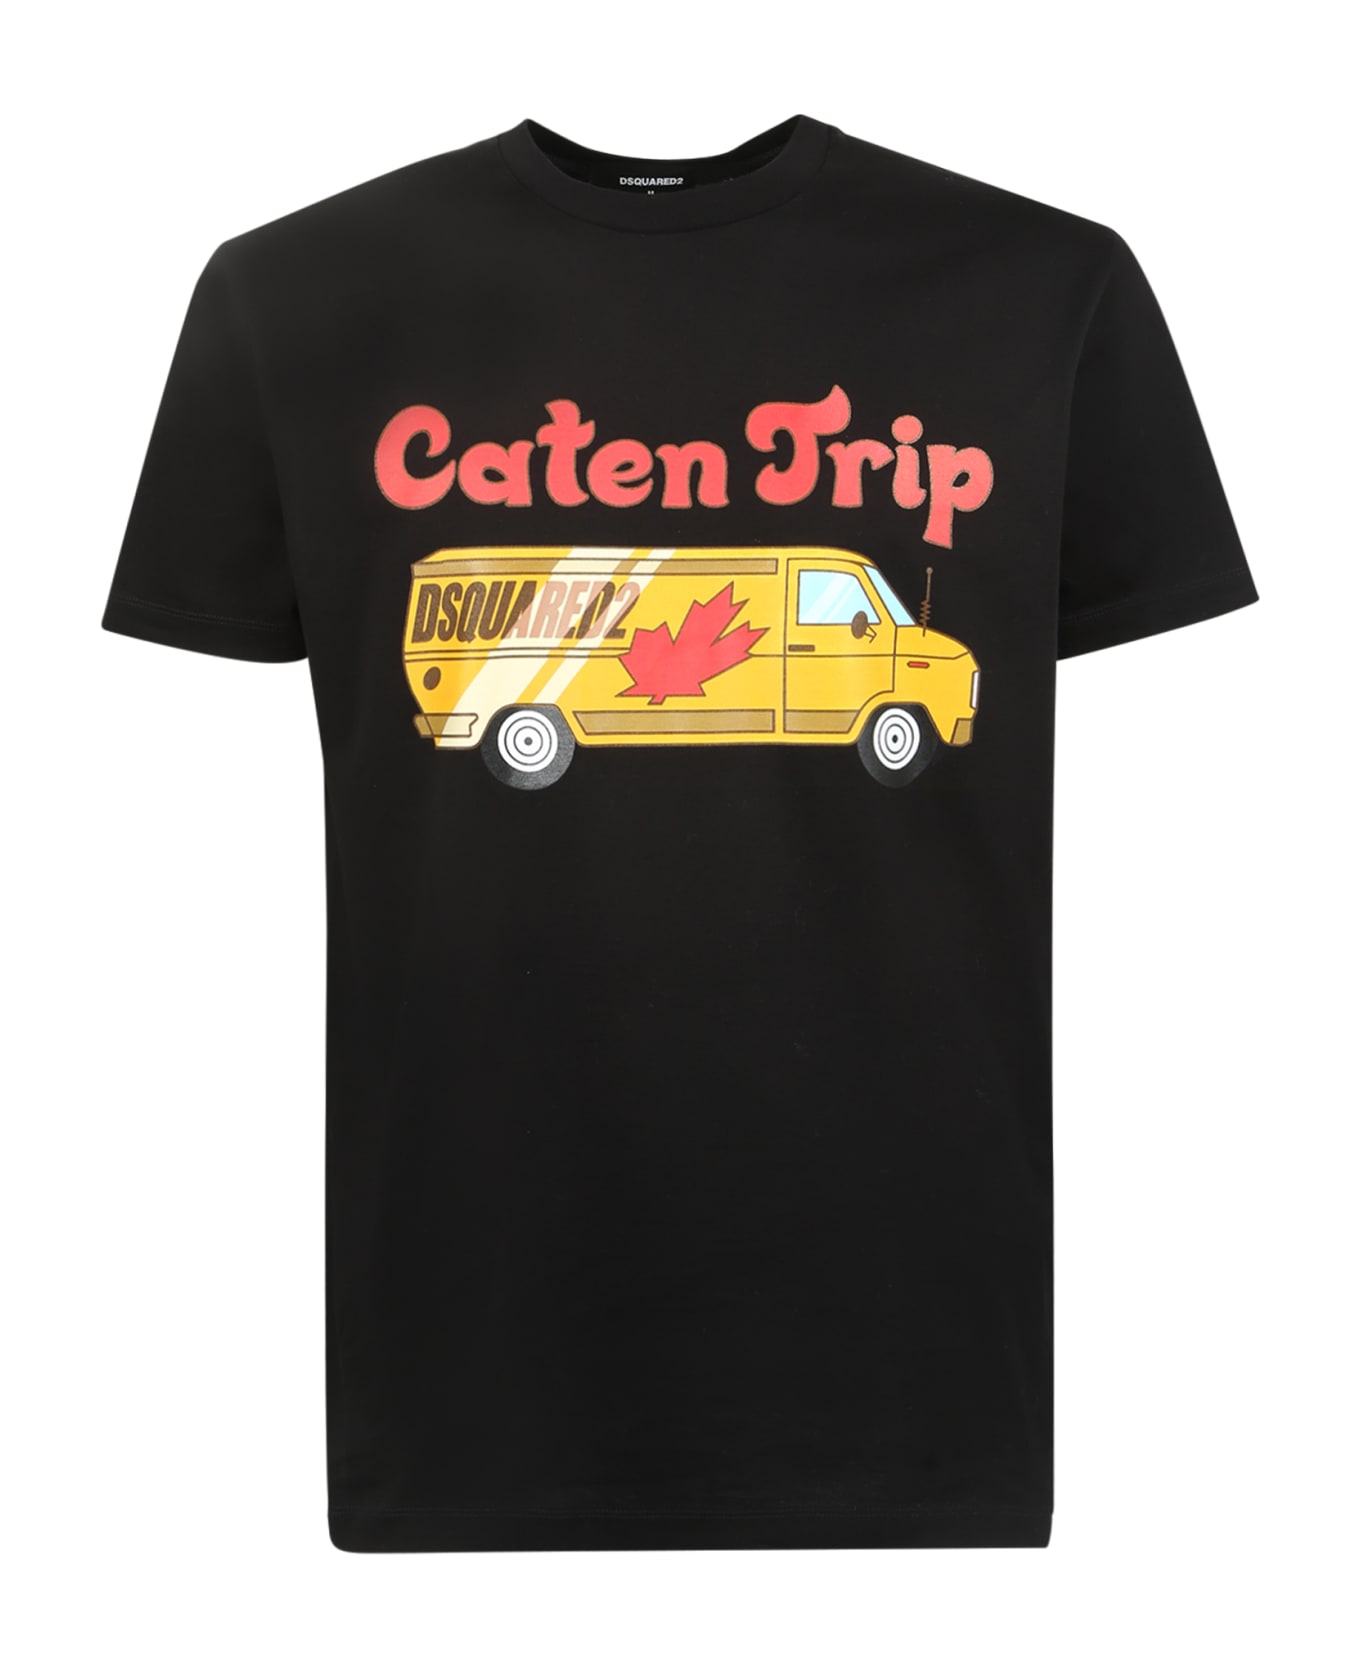 Dsquared2 Caten Trip Graphic T-shirt - Black シャツ